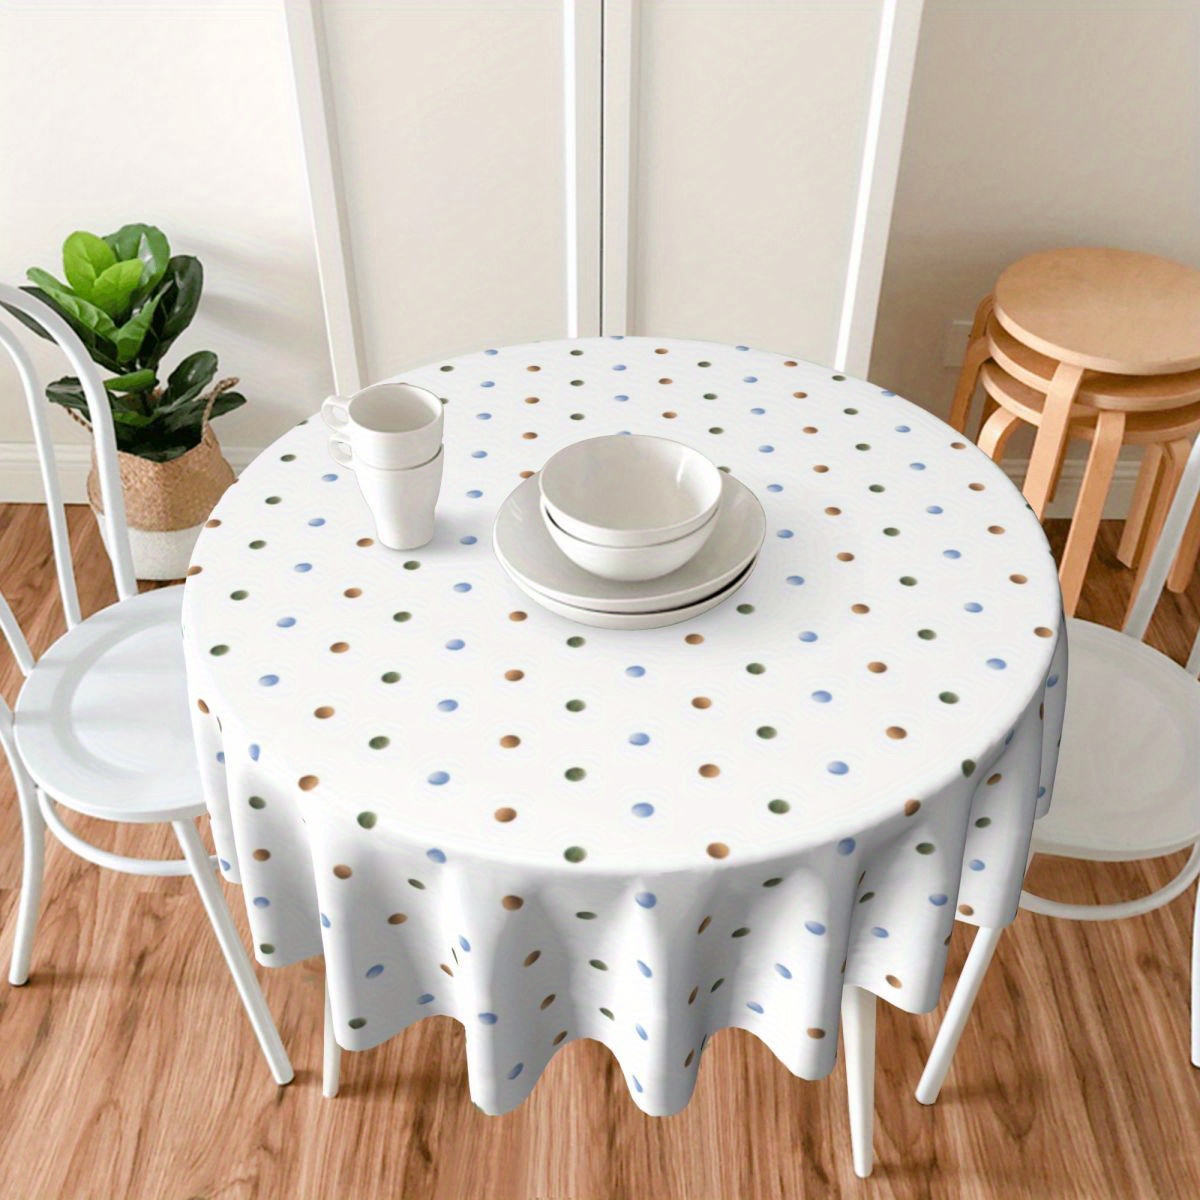 

1pc Polka Dot Print Round Tablecloth, Stain Resistant Washable Ultra-fine Fiber Table Cover, Festive Party Decor, Home Kitchen Dining Decoration, Polyester Woven Machine Made - 100% Polyester